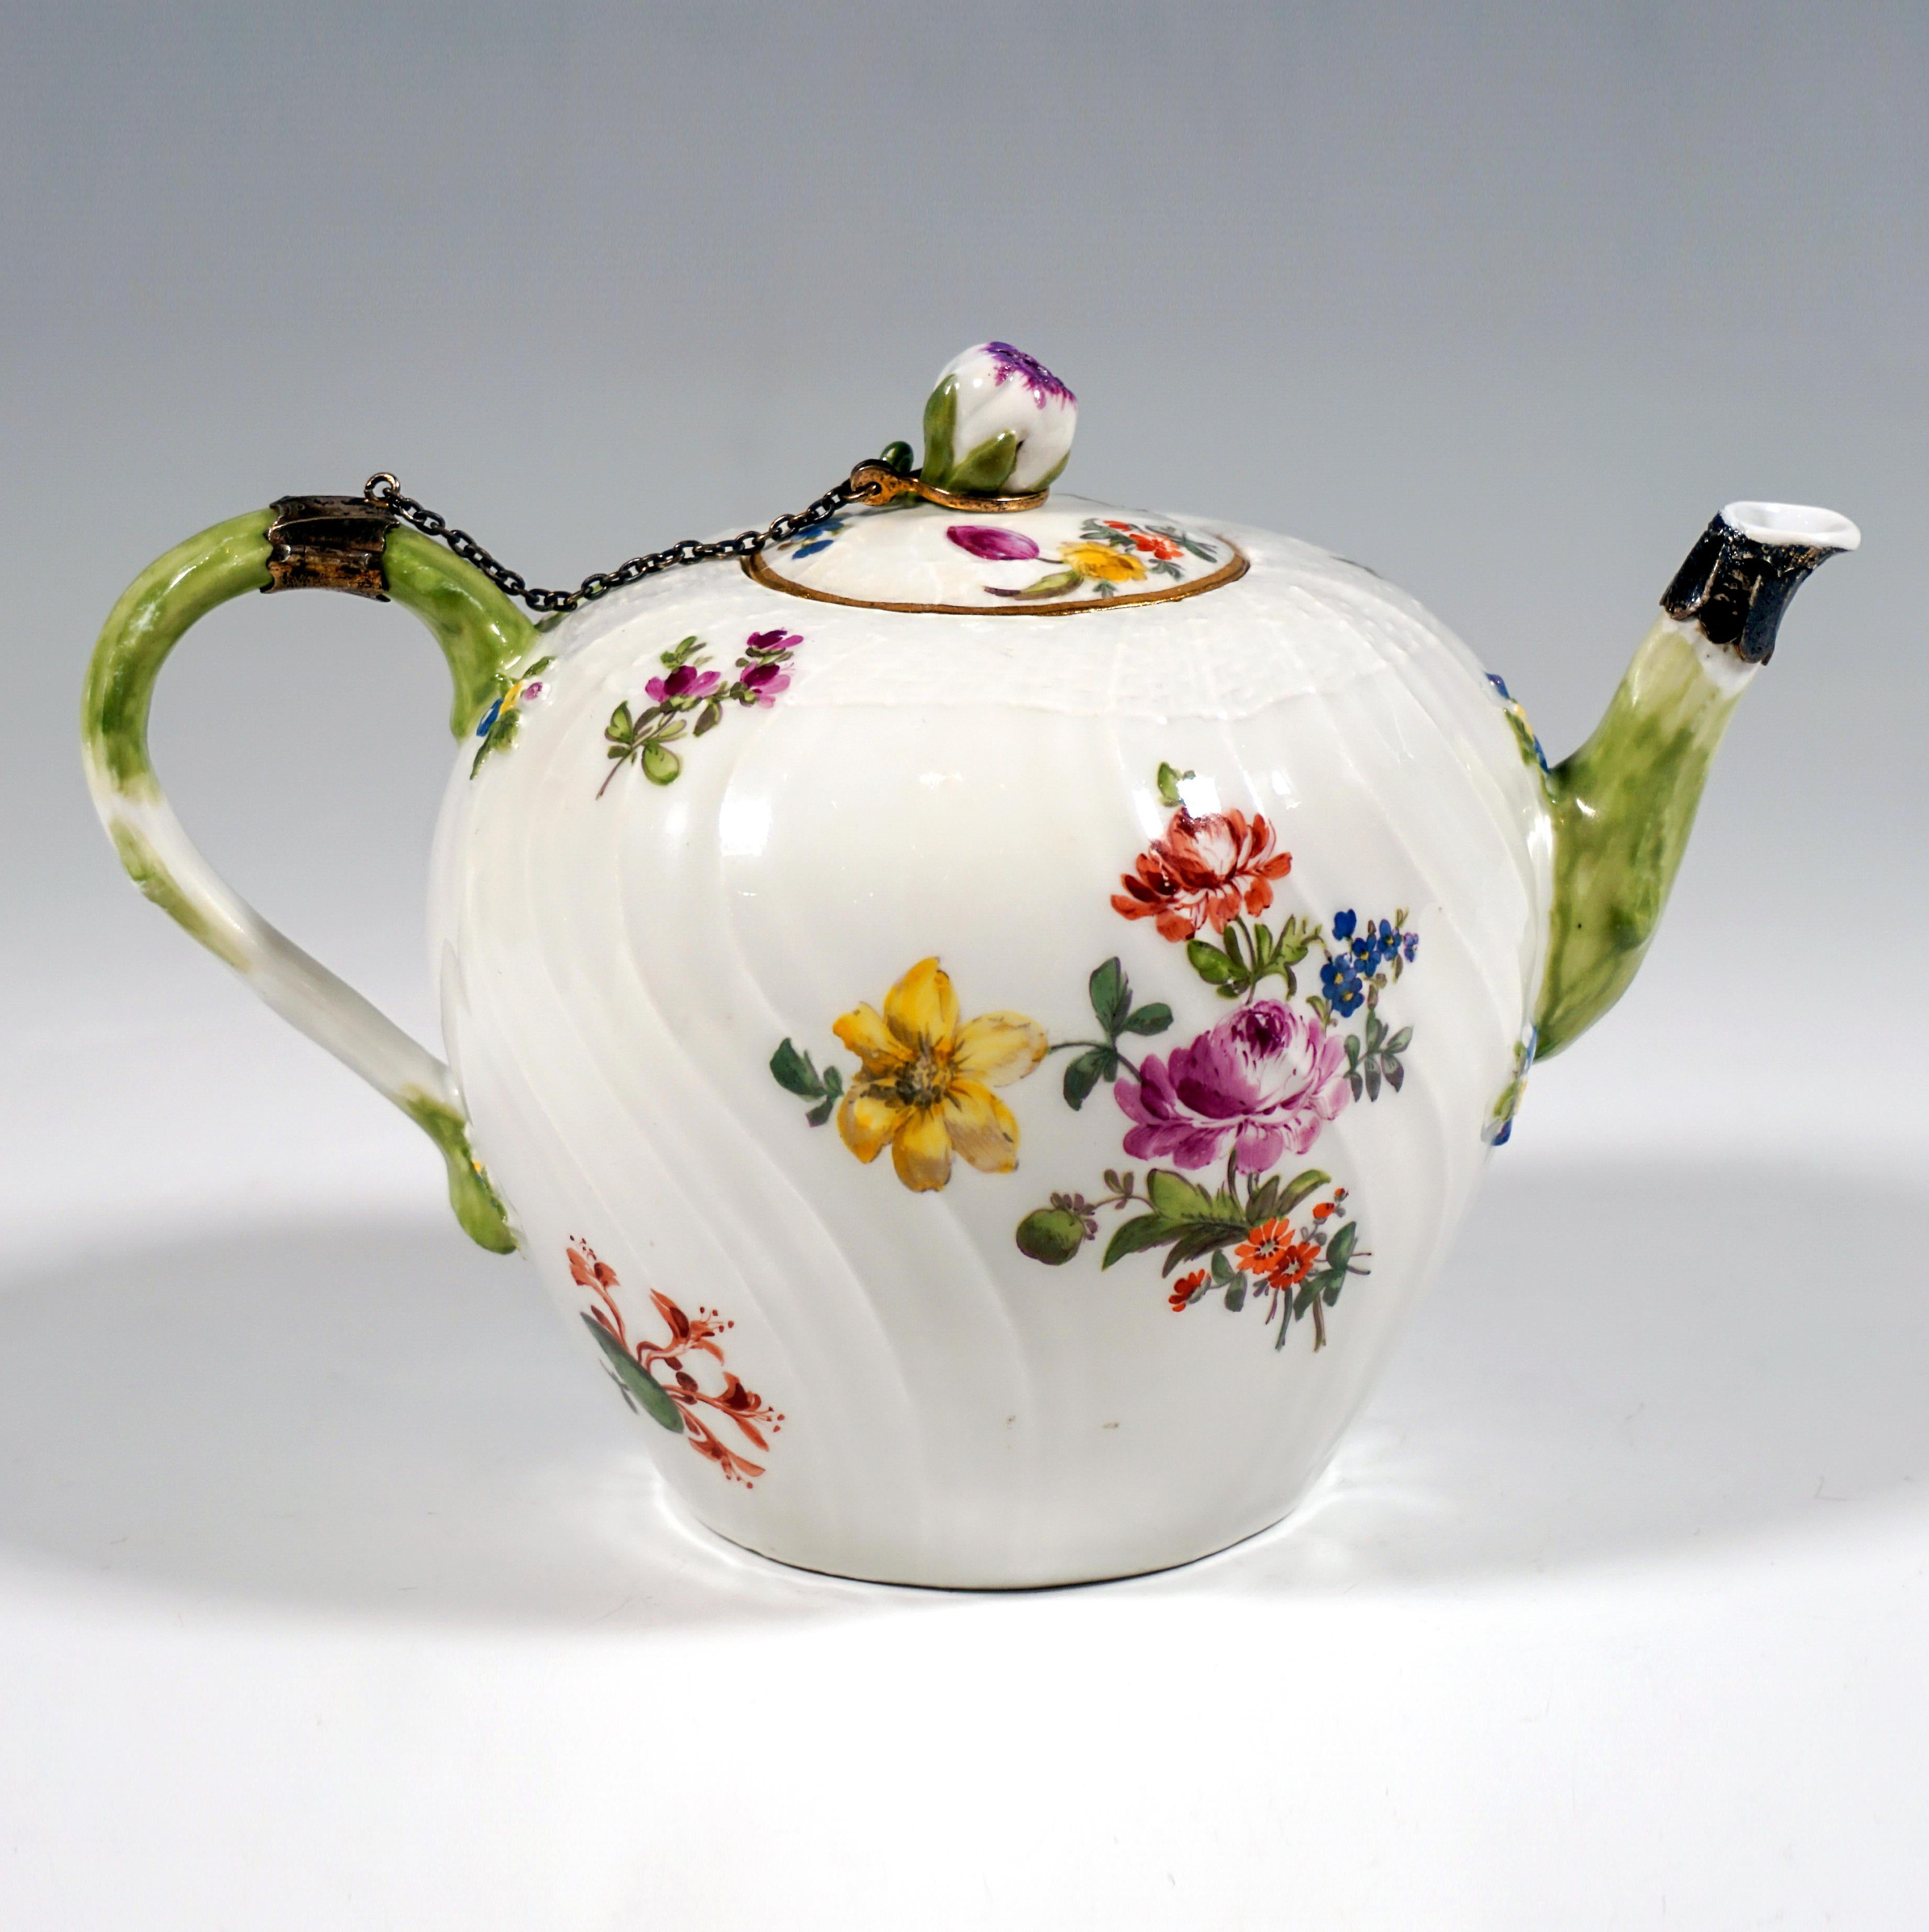 Very early Meissen teapot, circa 1750, Osier form with basket weave on the rim of the lid and around the opening of the teapot, as well as curved bars, spout and handle with knotted relief, belly of the teapot painted on the front and back with